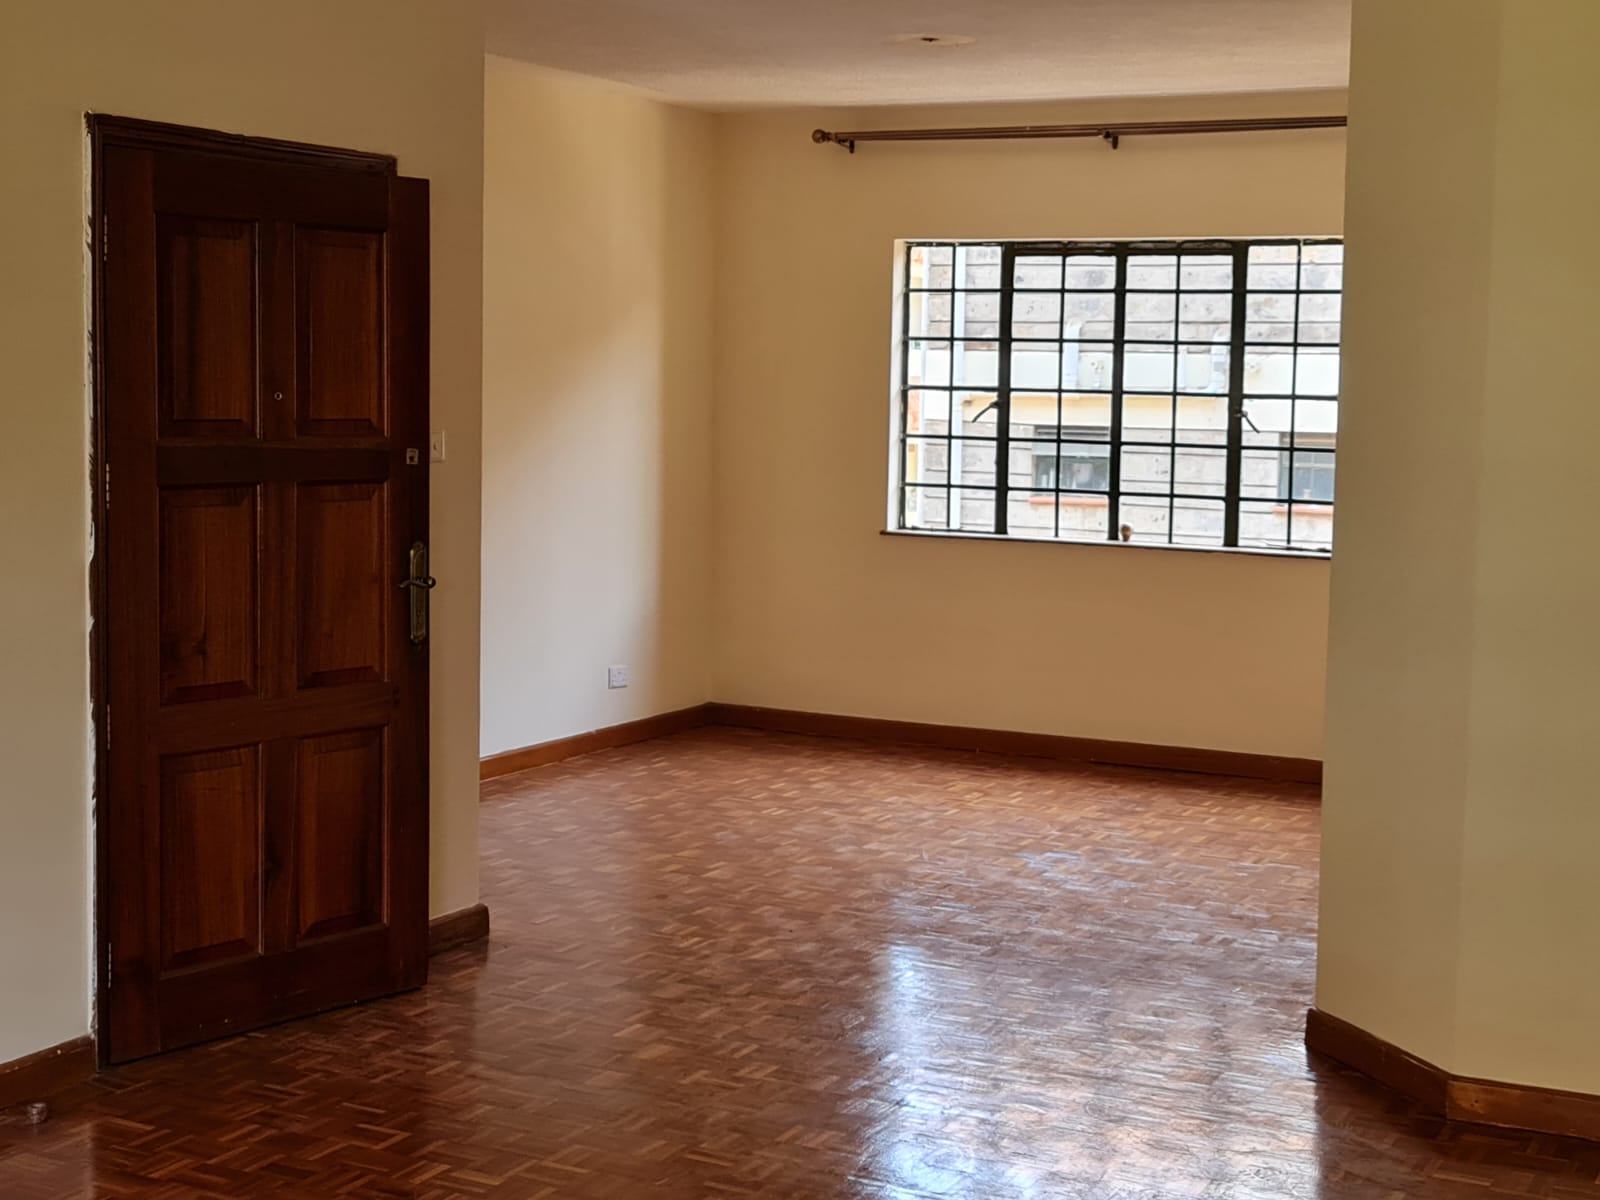 Newly Renovated Spacious 4 Bedroom Apartment for Rent at Ksh95k in Westlands, Raphta Road (5)